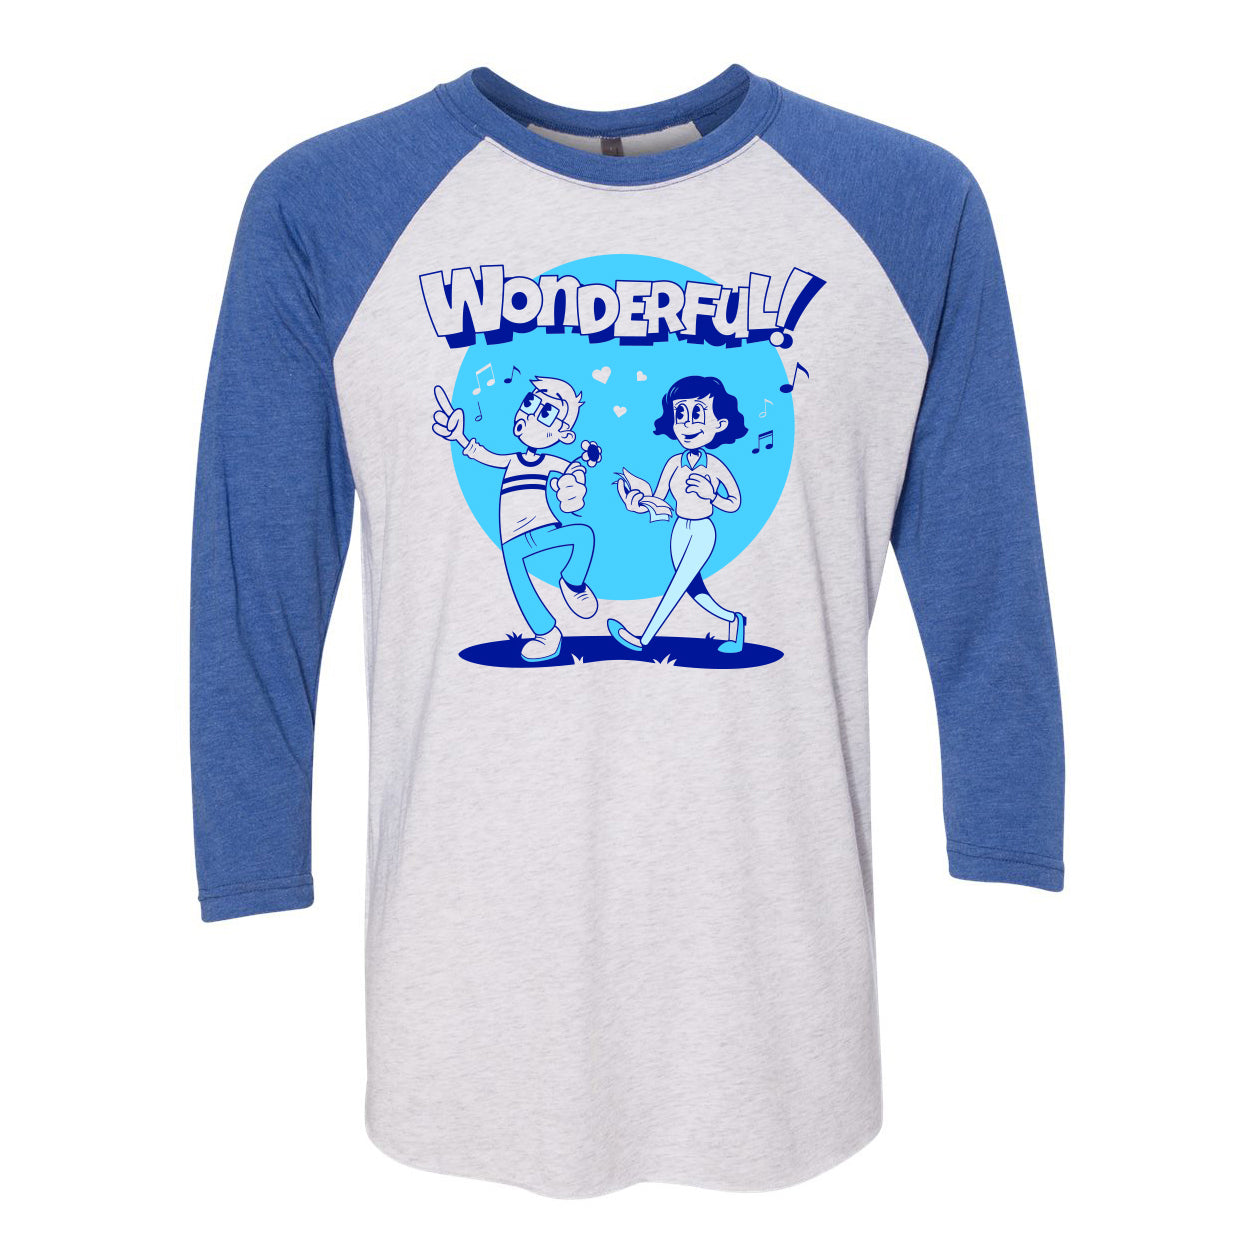 A grey baseball tee with blue sleeves. On the front is an illustration of Grifin and Rachel in a cartoon style. Griffin is whistling and holding a flower. Rachel is walking behind him with an open book in her hand. Around them are white and dark blue music notes and dark blue hears. Behind them is a bright blue square. Above them the shirt says, "Wonderful!"